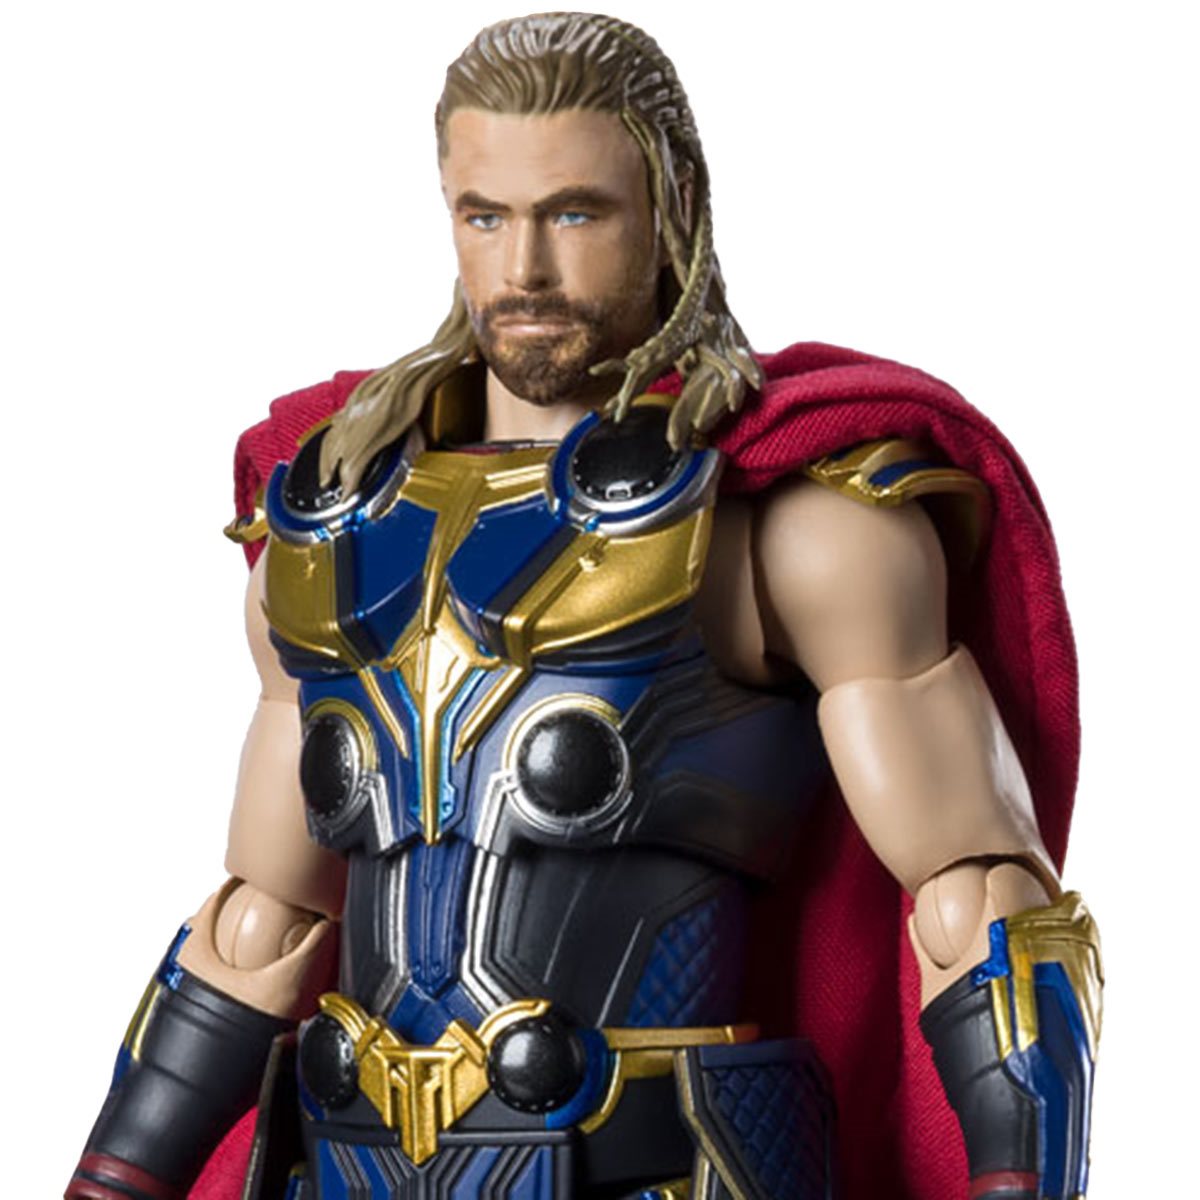 ca.15 cm BANDAI MARVEL AVENGERS AGE OF ULTRON THOR FIGUARTS 4,5" INCH S.H 